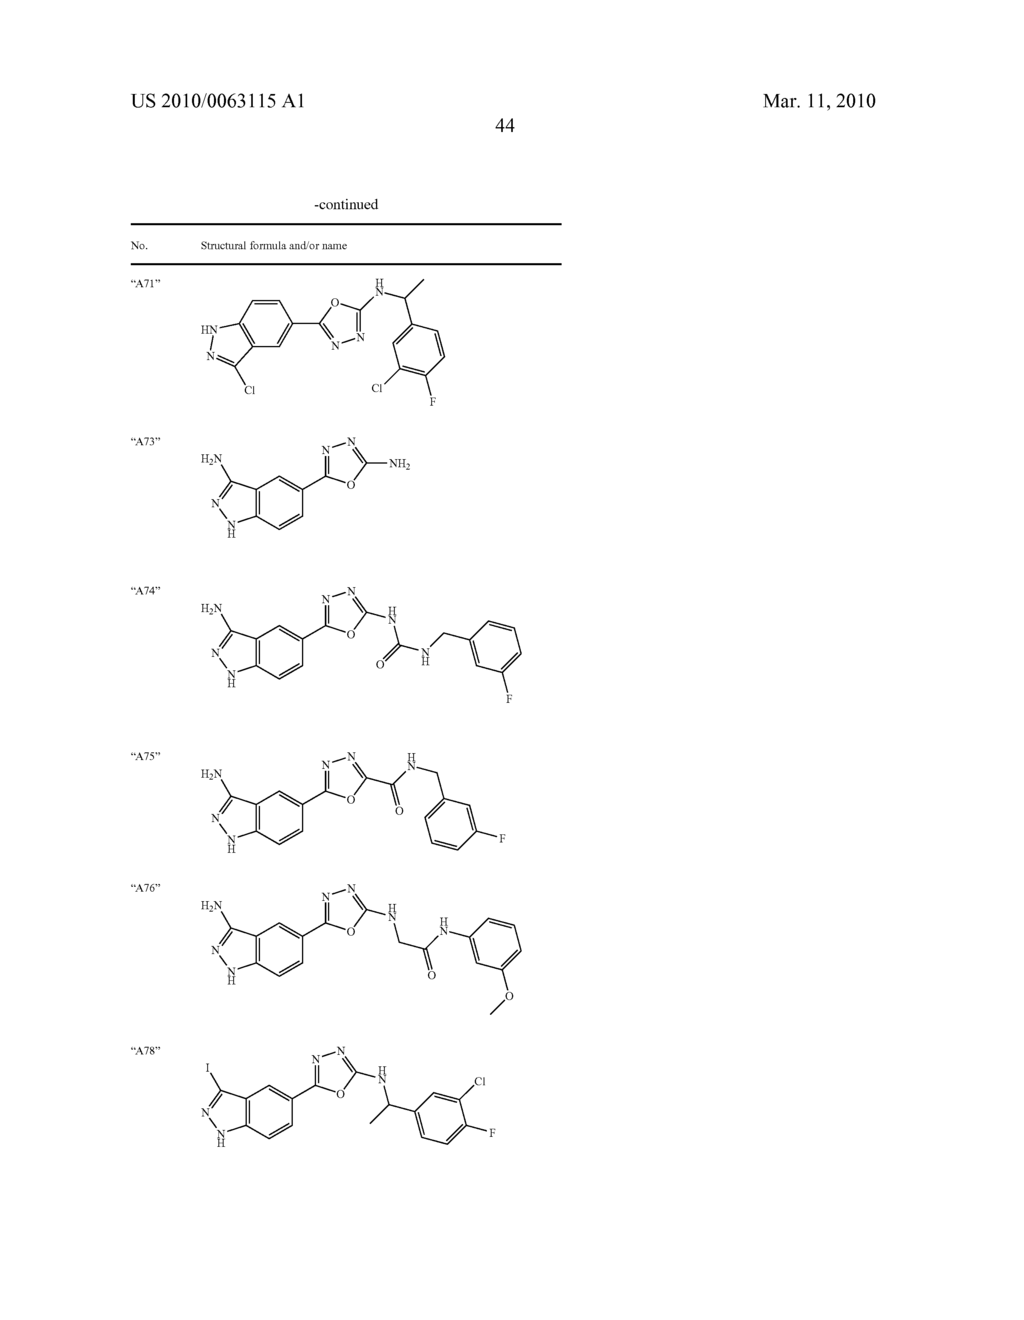 5-(1,3,4-OXADIAZOL-2-YL)-1H-INDAZOLE AND 5-(1,3,4-THIADIAZOL-2-YL)-1H-INDAZOLE DERIVATIVES AS SGK INHIBITORS FOR THE TREATMENT OF DIABETES - diagram, schematic, and image 45